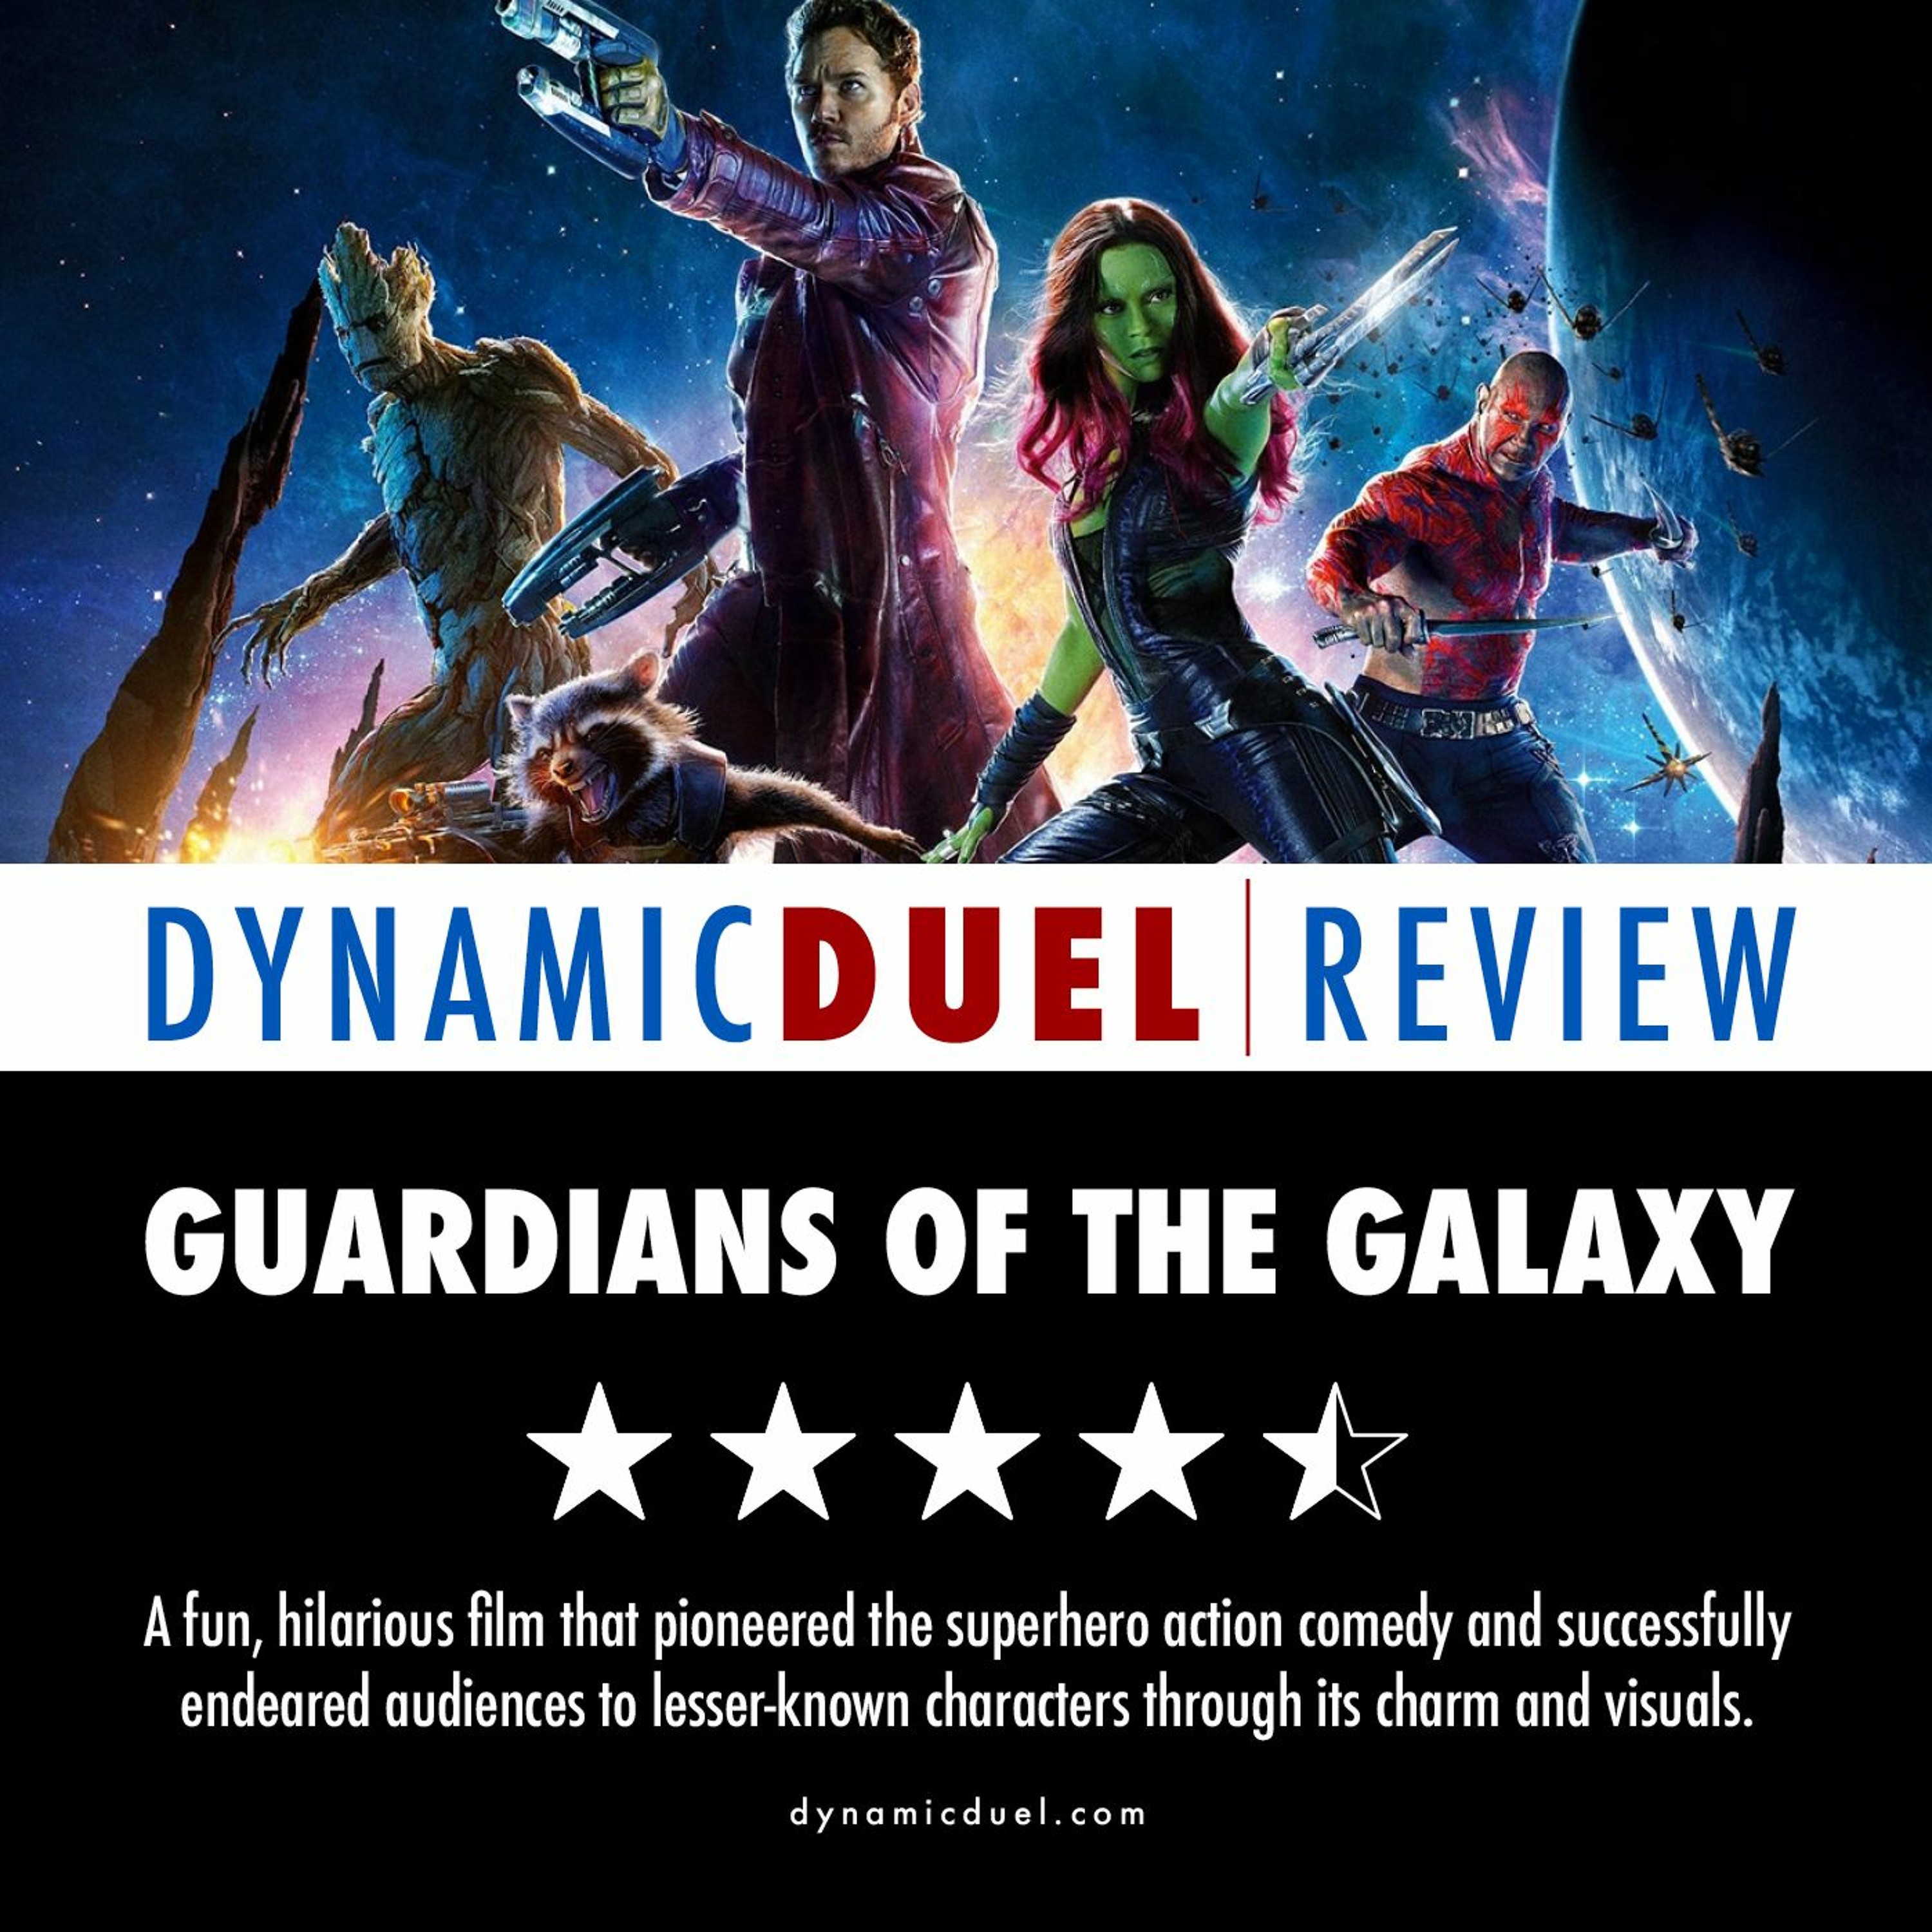 Guardians of the Galaxy Review Image